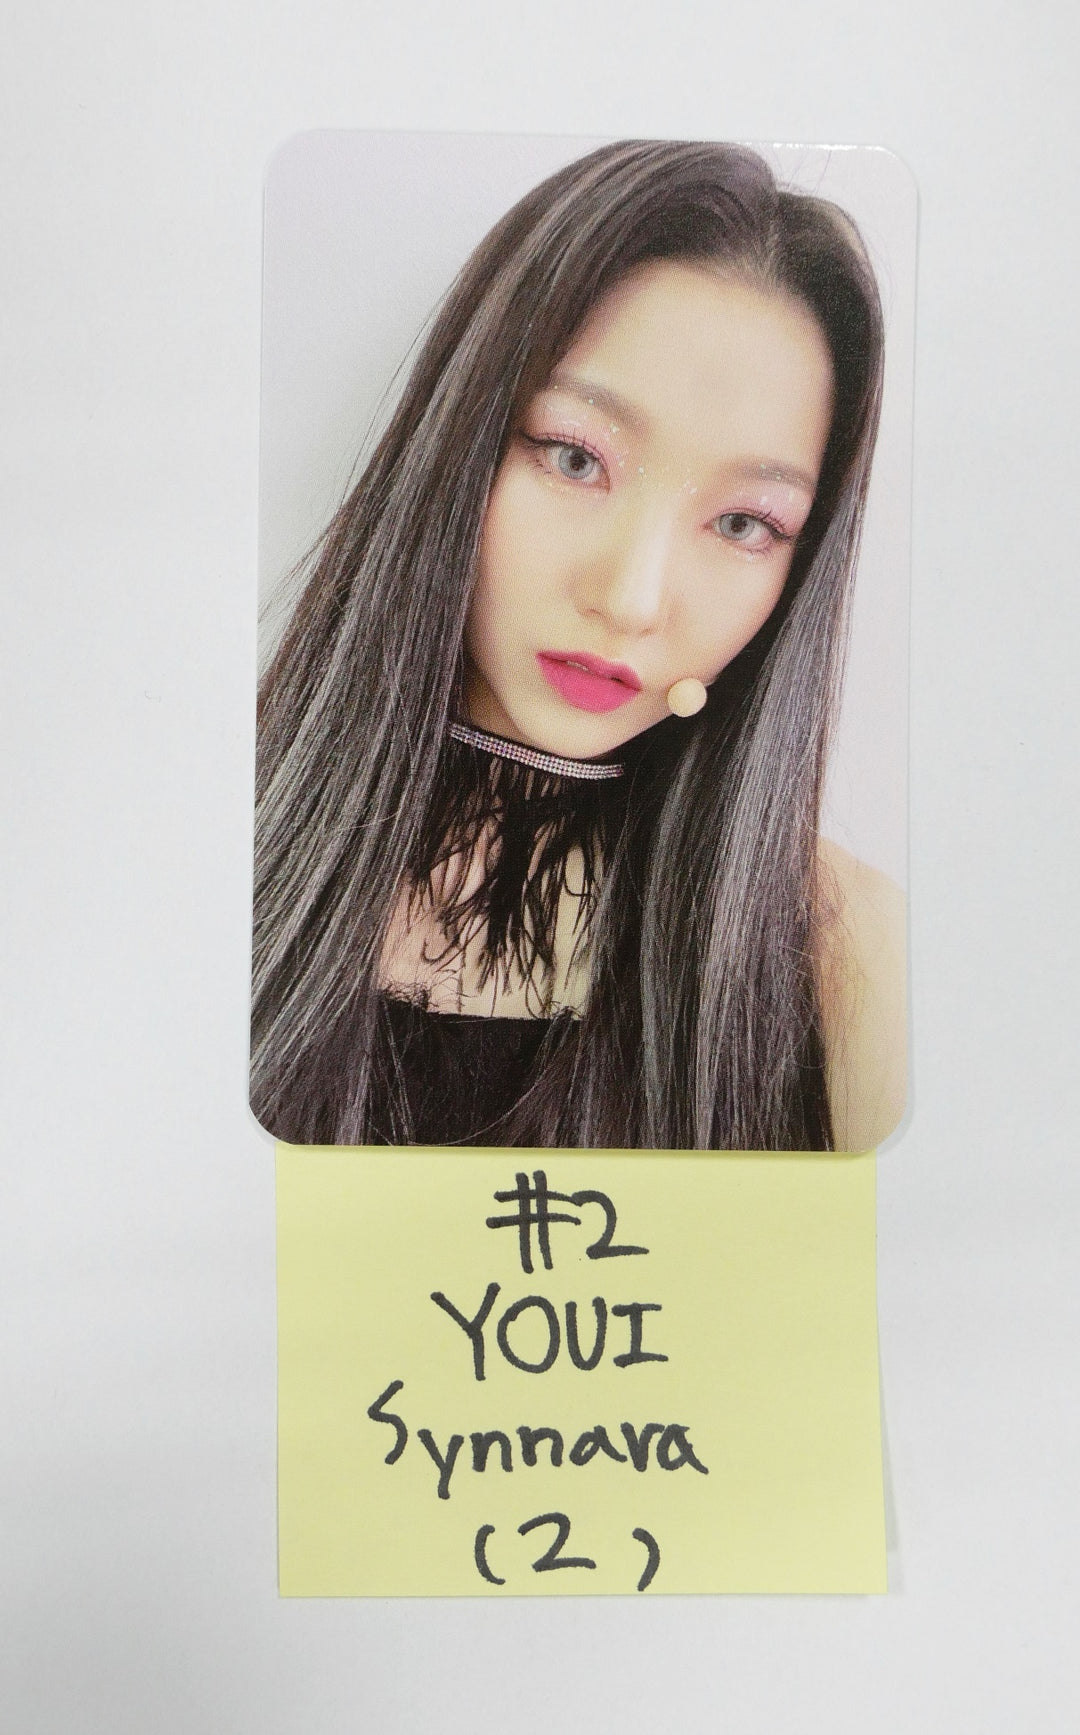 Dream Note 'Dreams Alive' 4th Single - Synnara Fansign Event Photocard